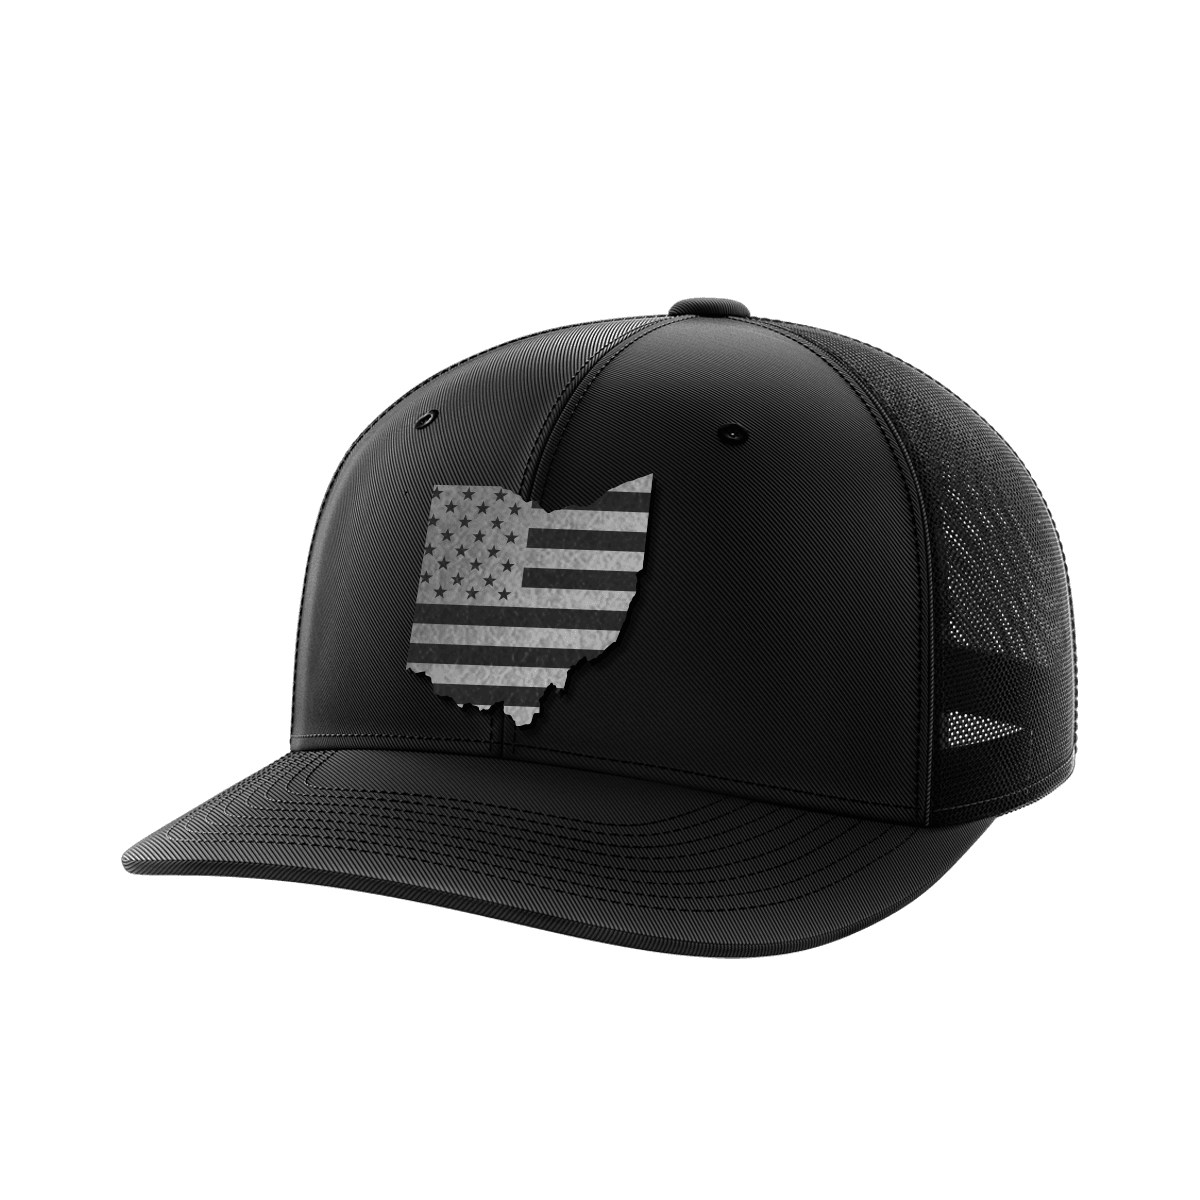 Ohio United Collection (black leather) - Greater Half